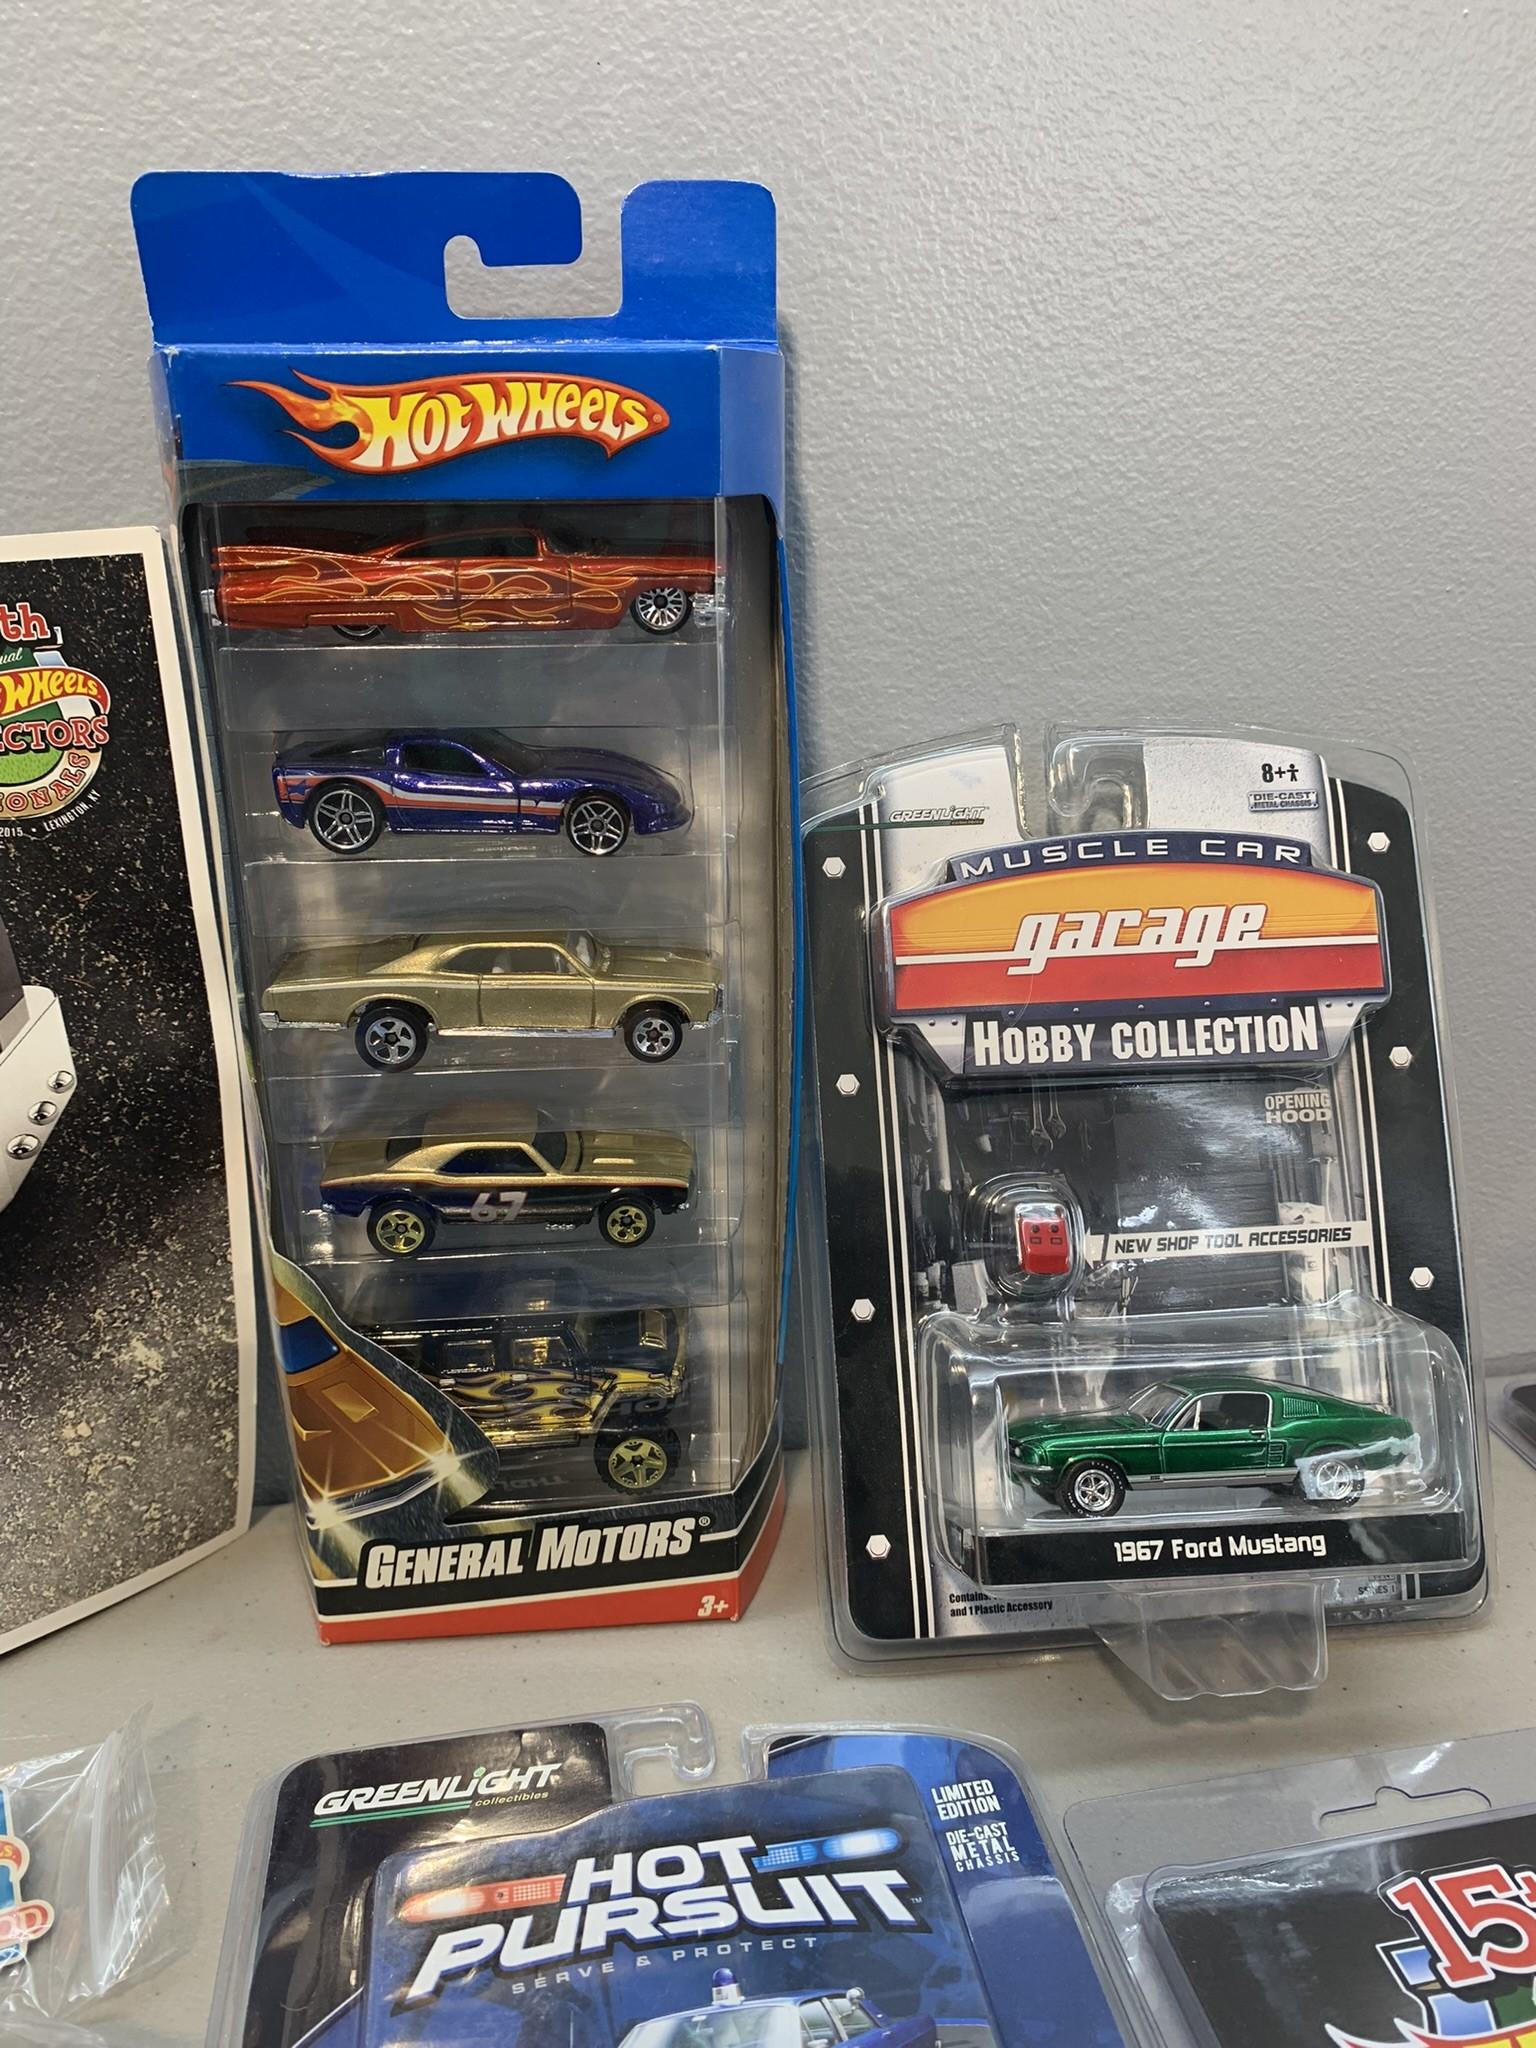 Great Group of Collector Hot Wheels, Johnny Lightning Street Freaks, GreenLight Hot Pursuit